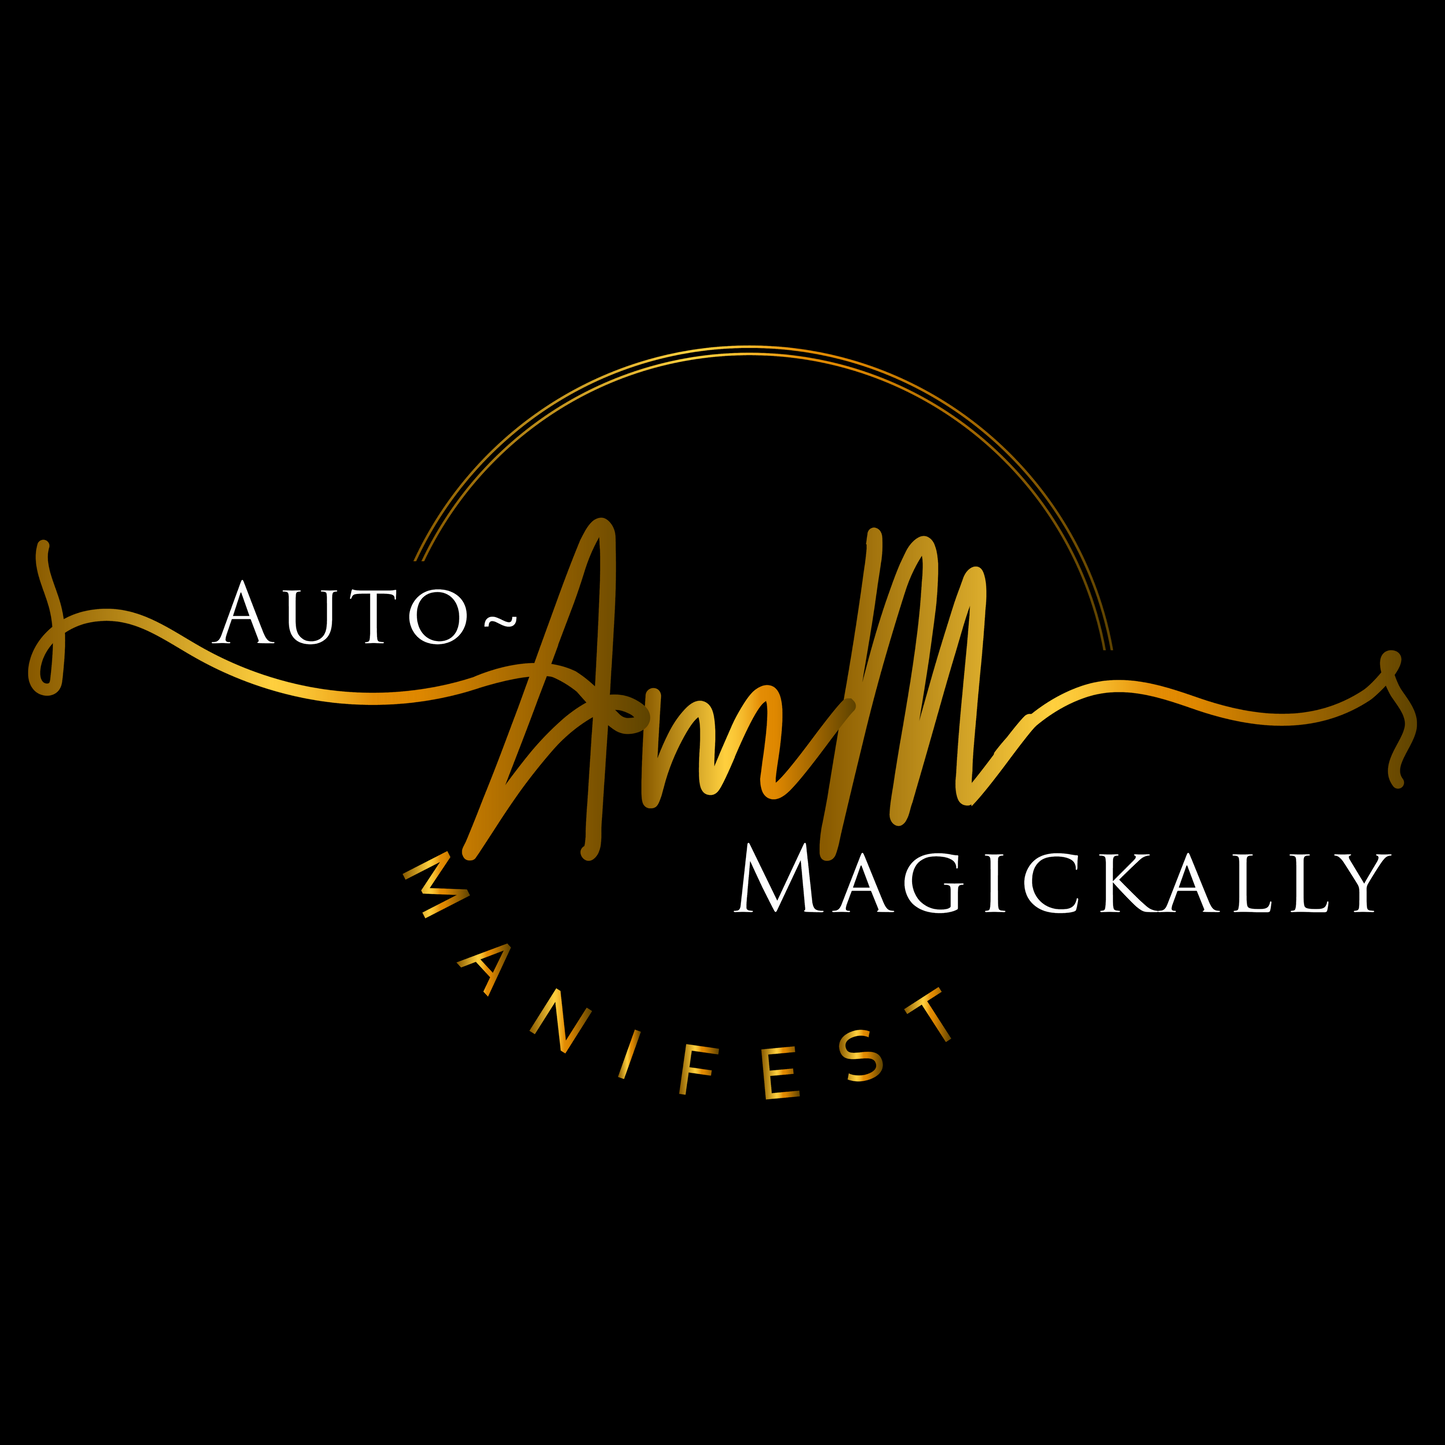 Auto-Magically Manifest® Herb Mixes